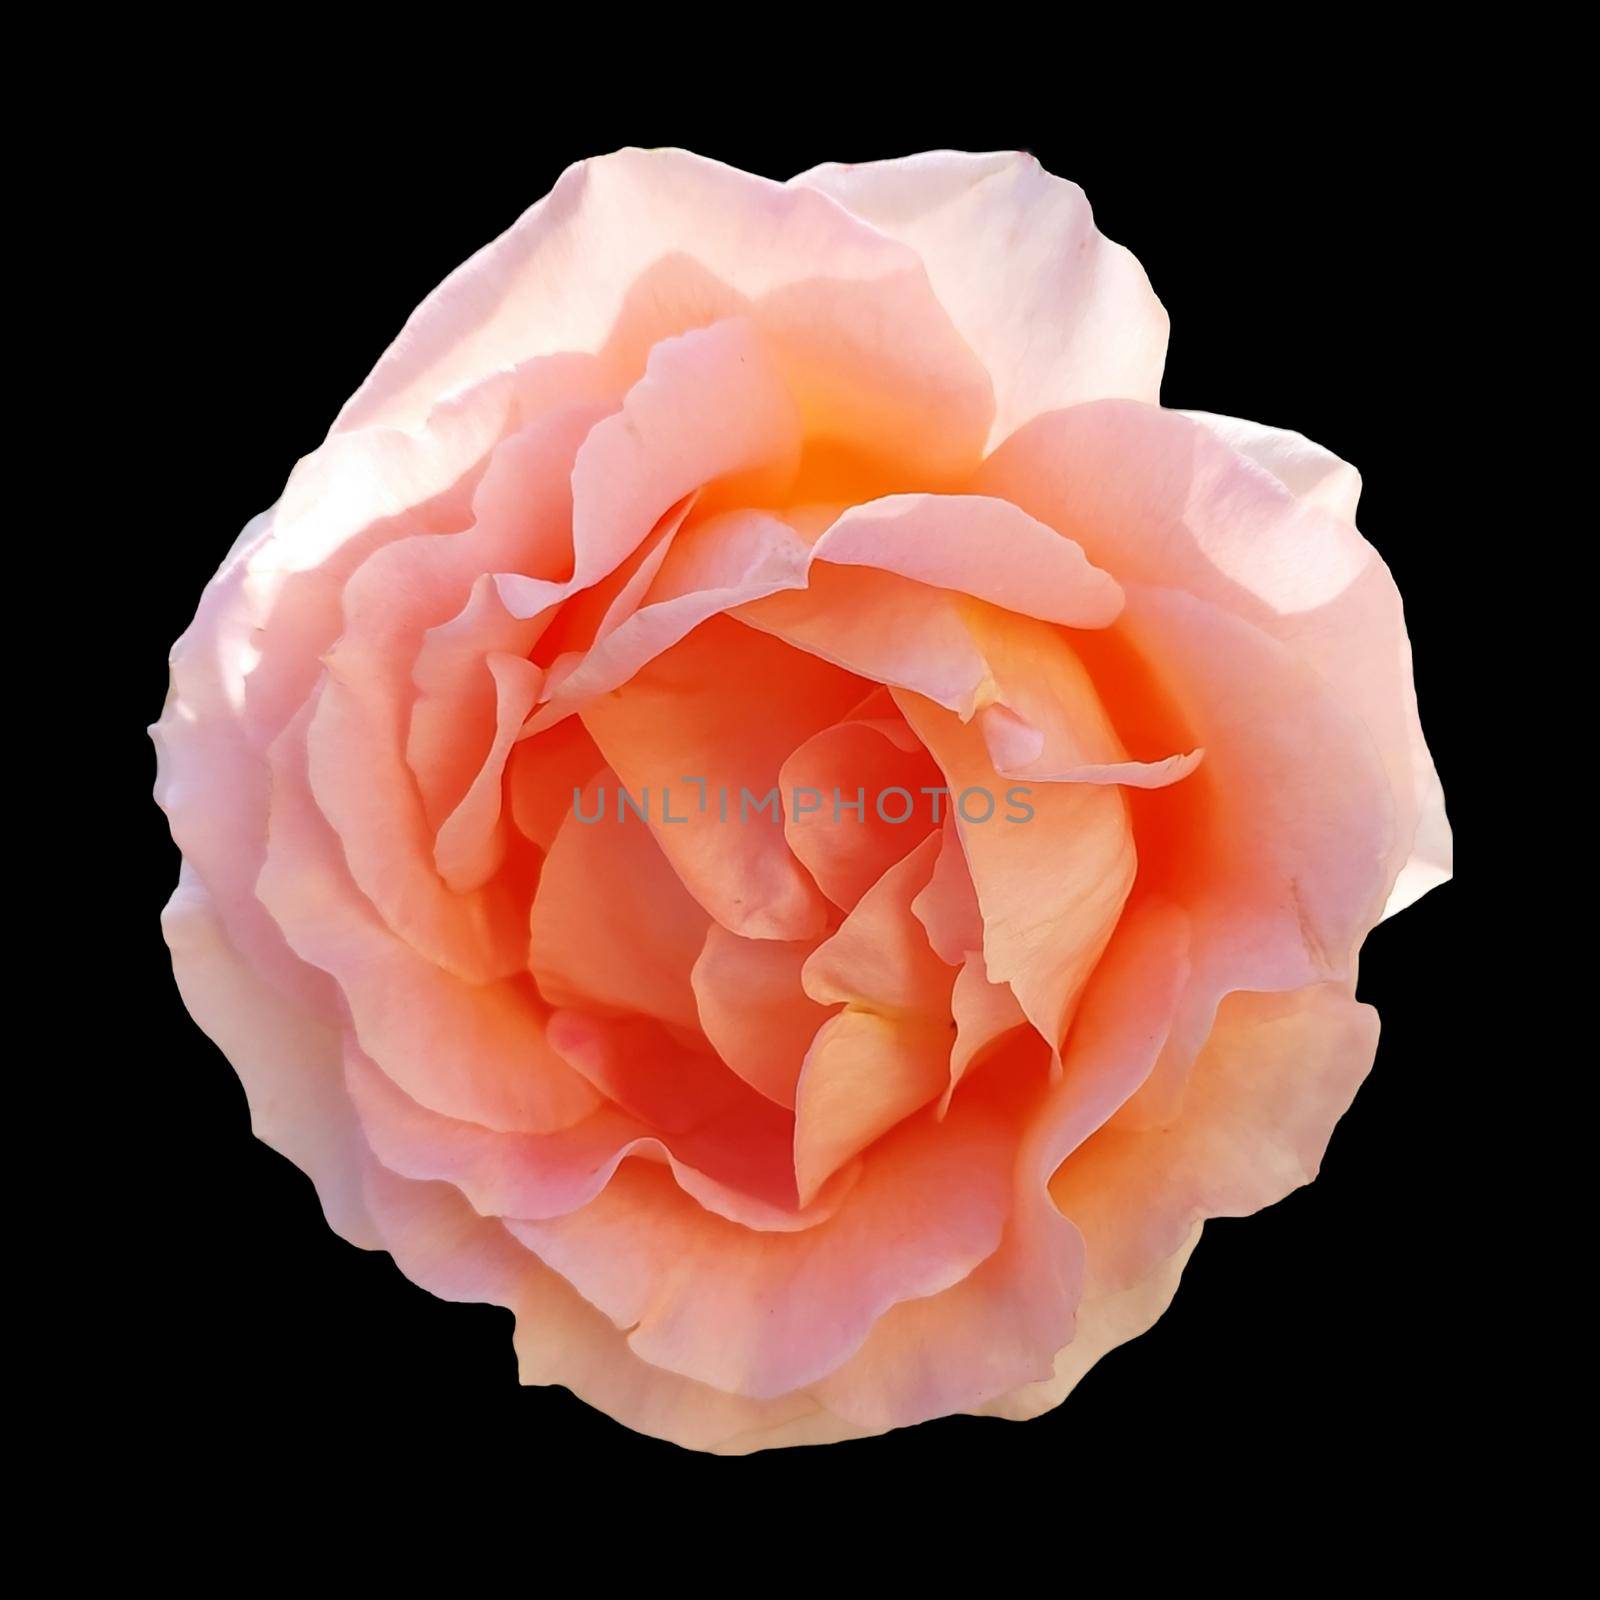 pink rose isolated on black background dicut with clipping path by gallofoto